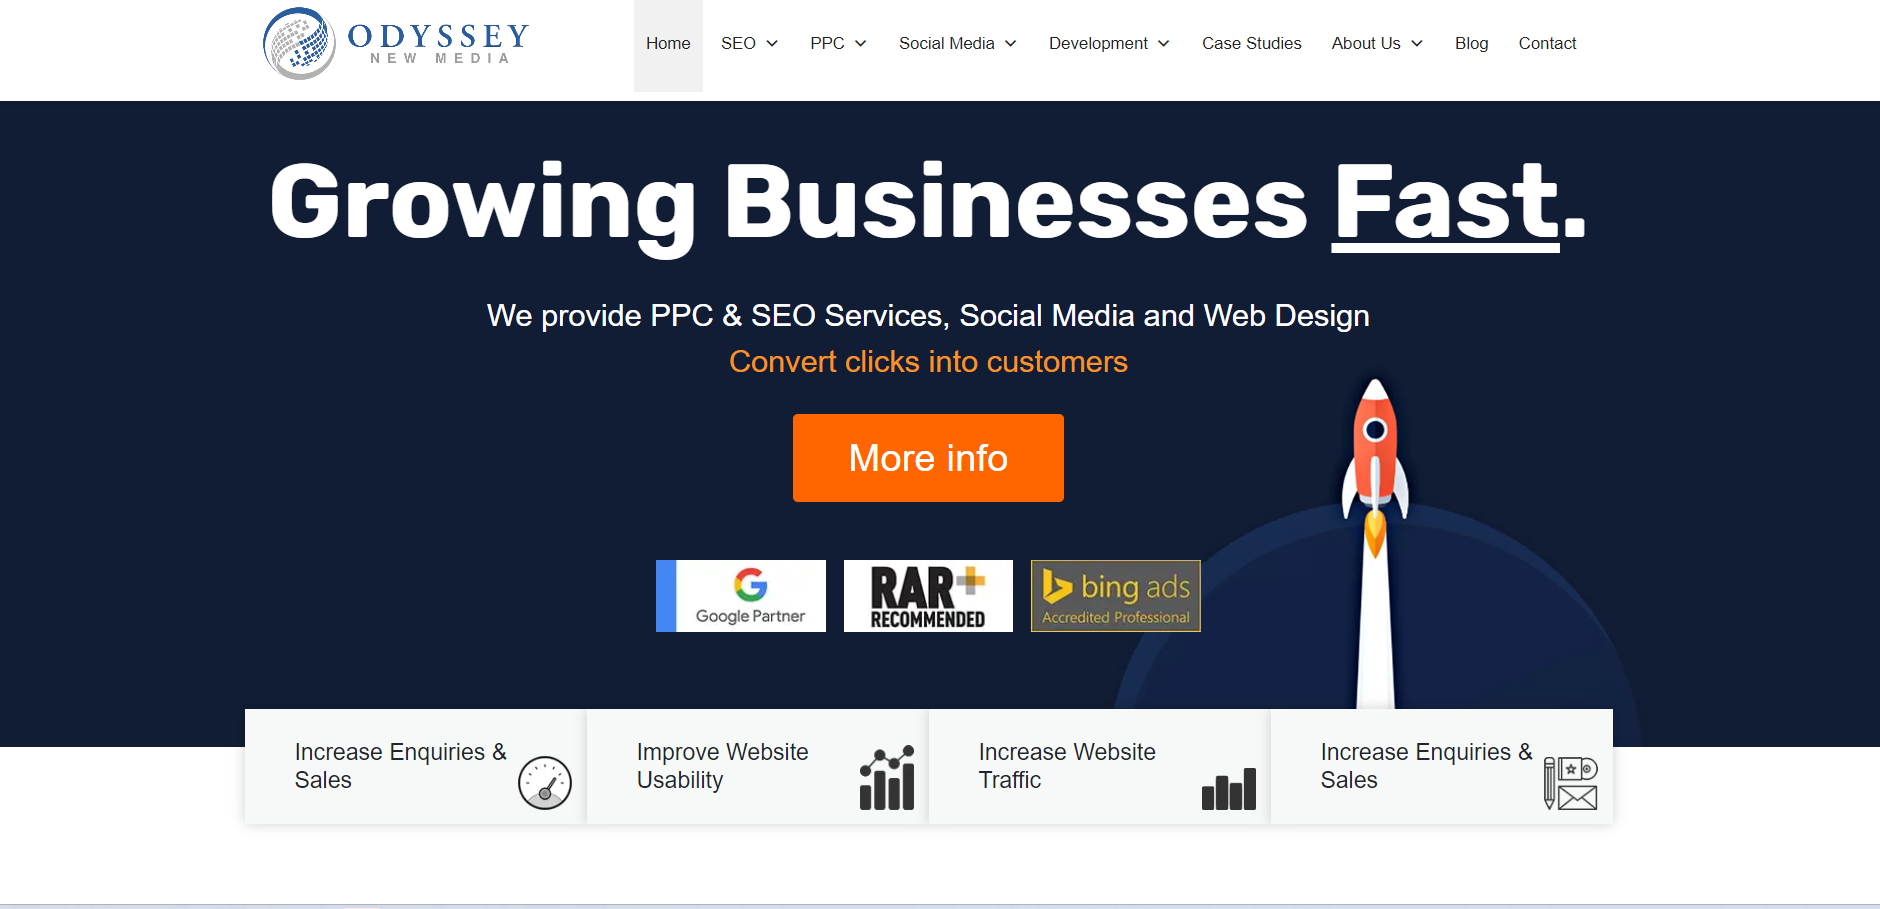 Odyssey New Media website - Growing Businesses fast with PPC and SEO services